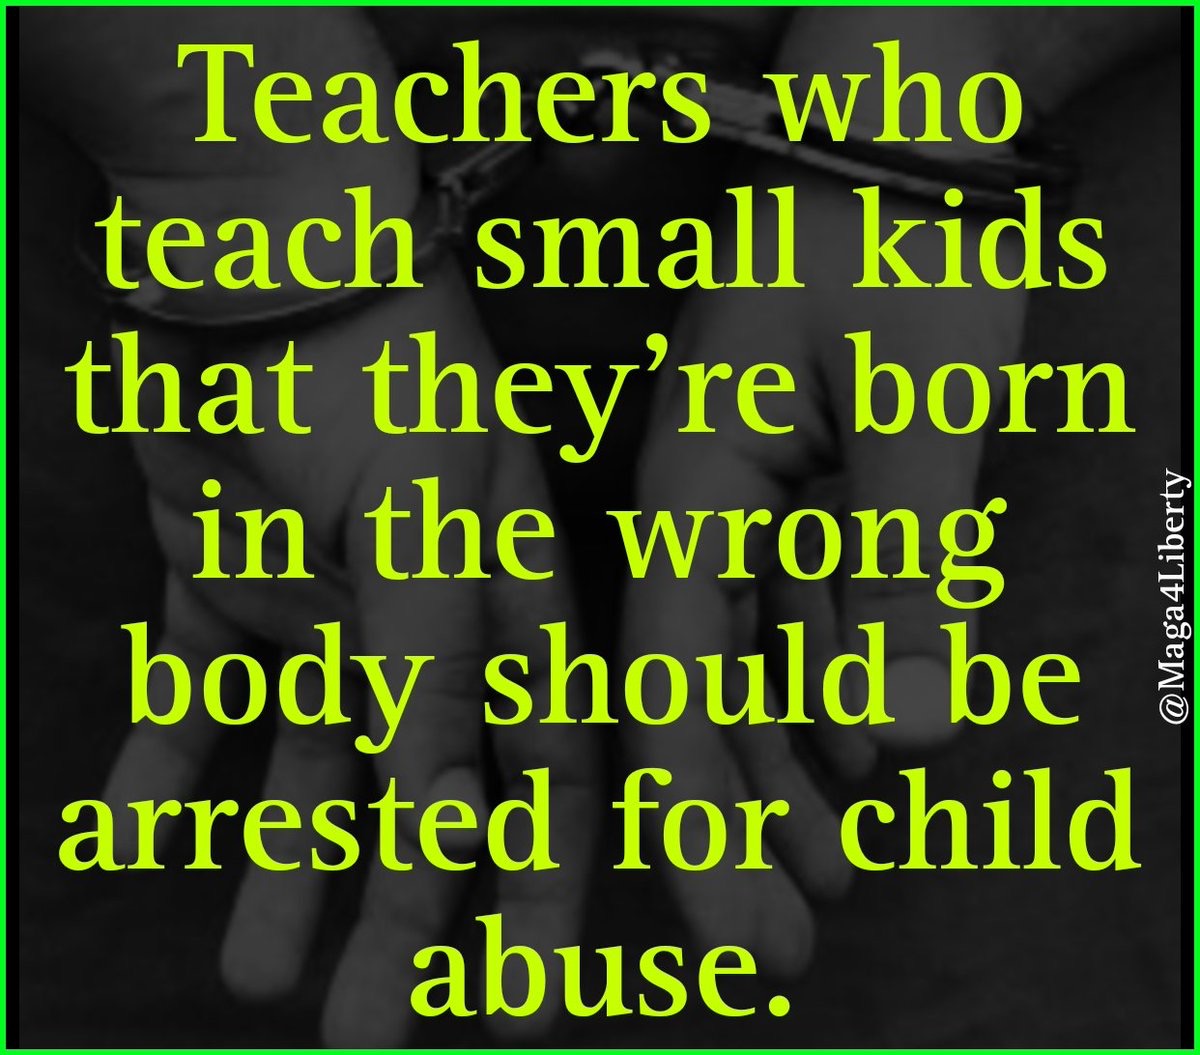 #PeriklesDepot 

🔥  Teachers who teach small kids
        that they're born in the wrong body 
        should be arrested for child abuse!  🔥